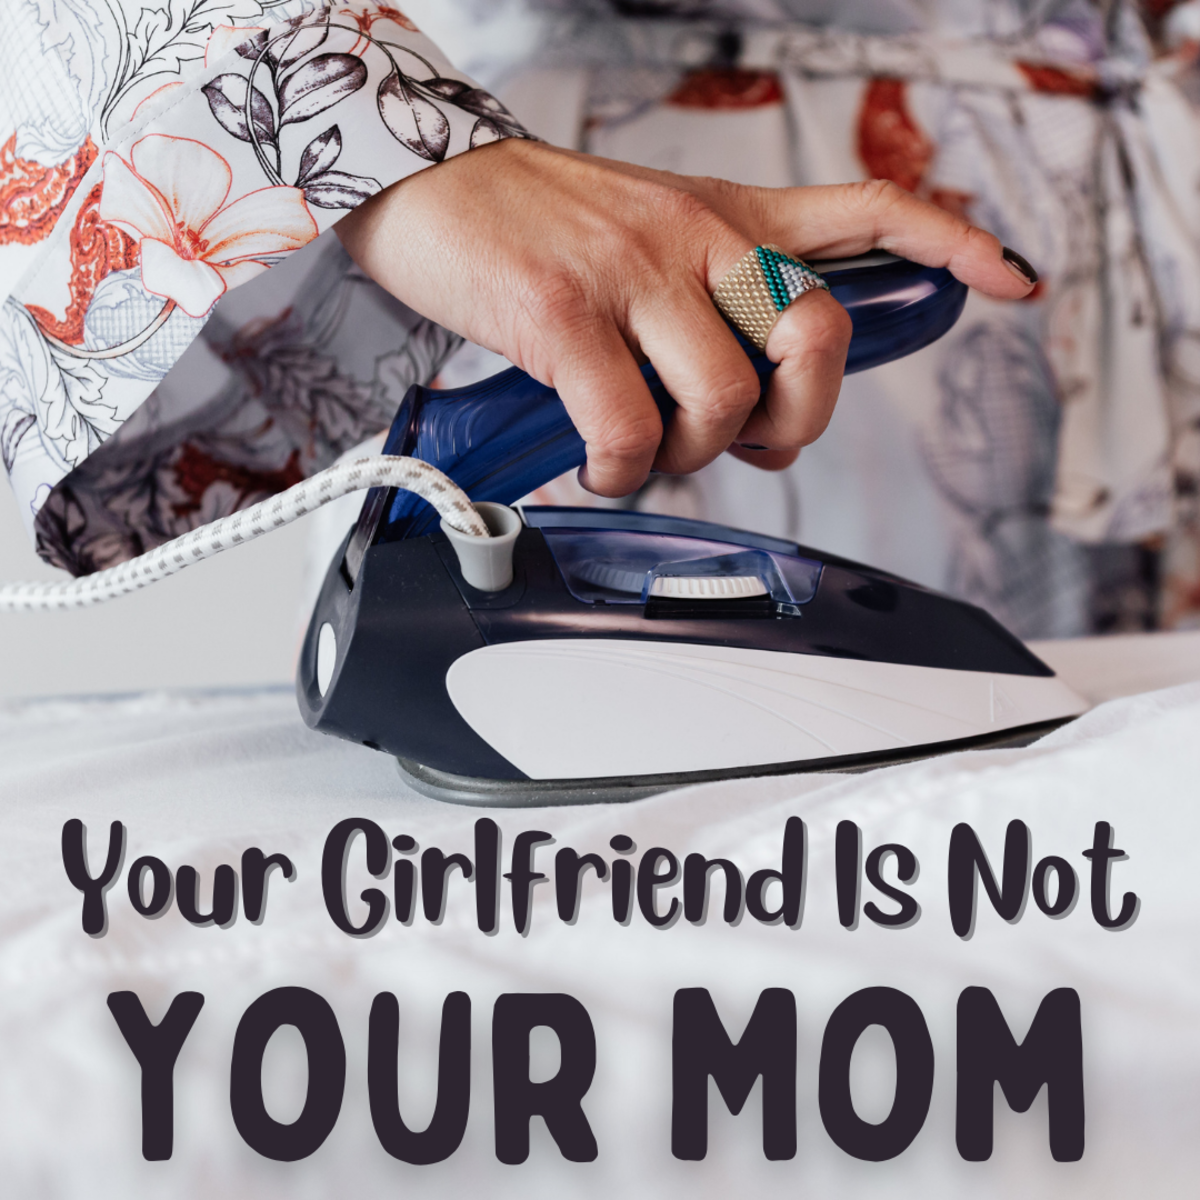 Attention Men: Your Girlfriend Is Not Your Mom